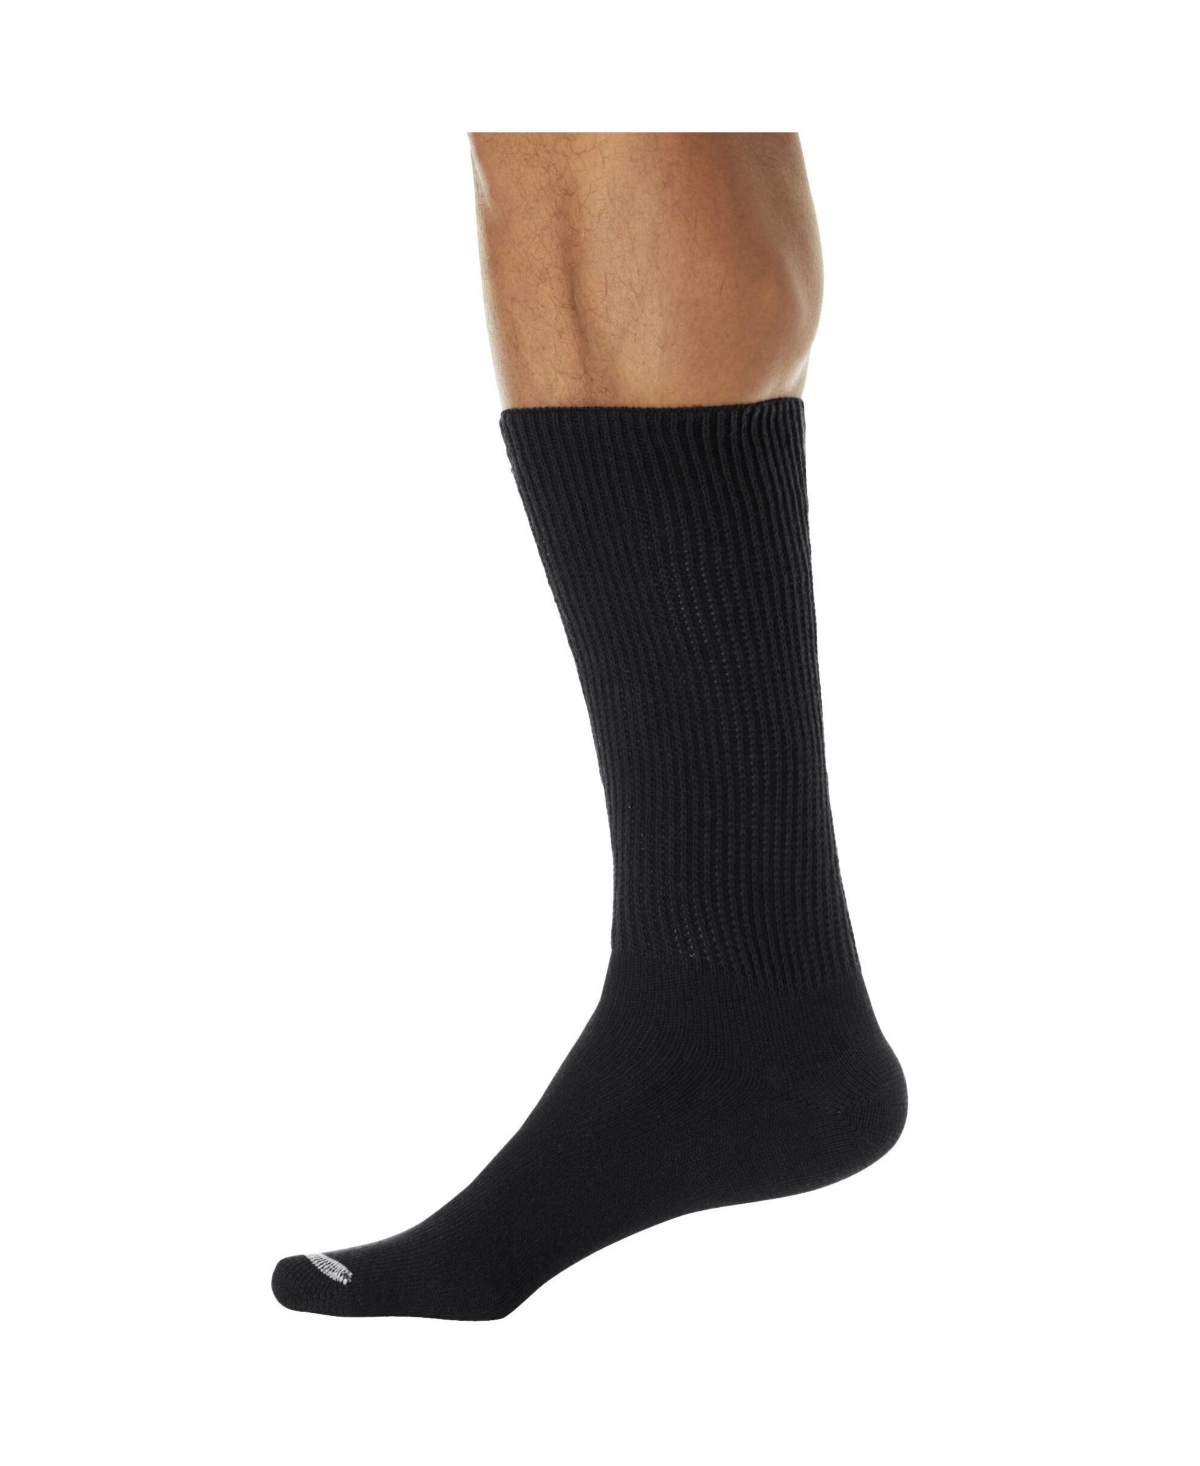 Big & Tall Diabetic Crew Socks With Extra Wide Footbed - White